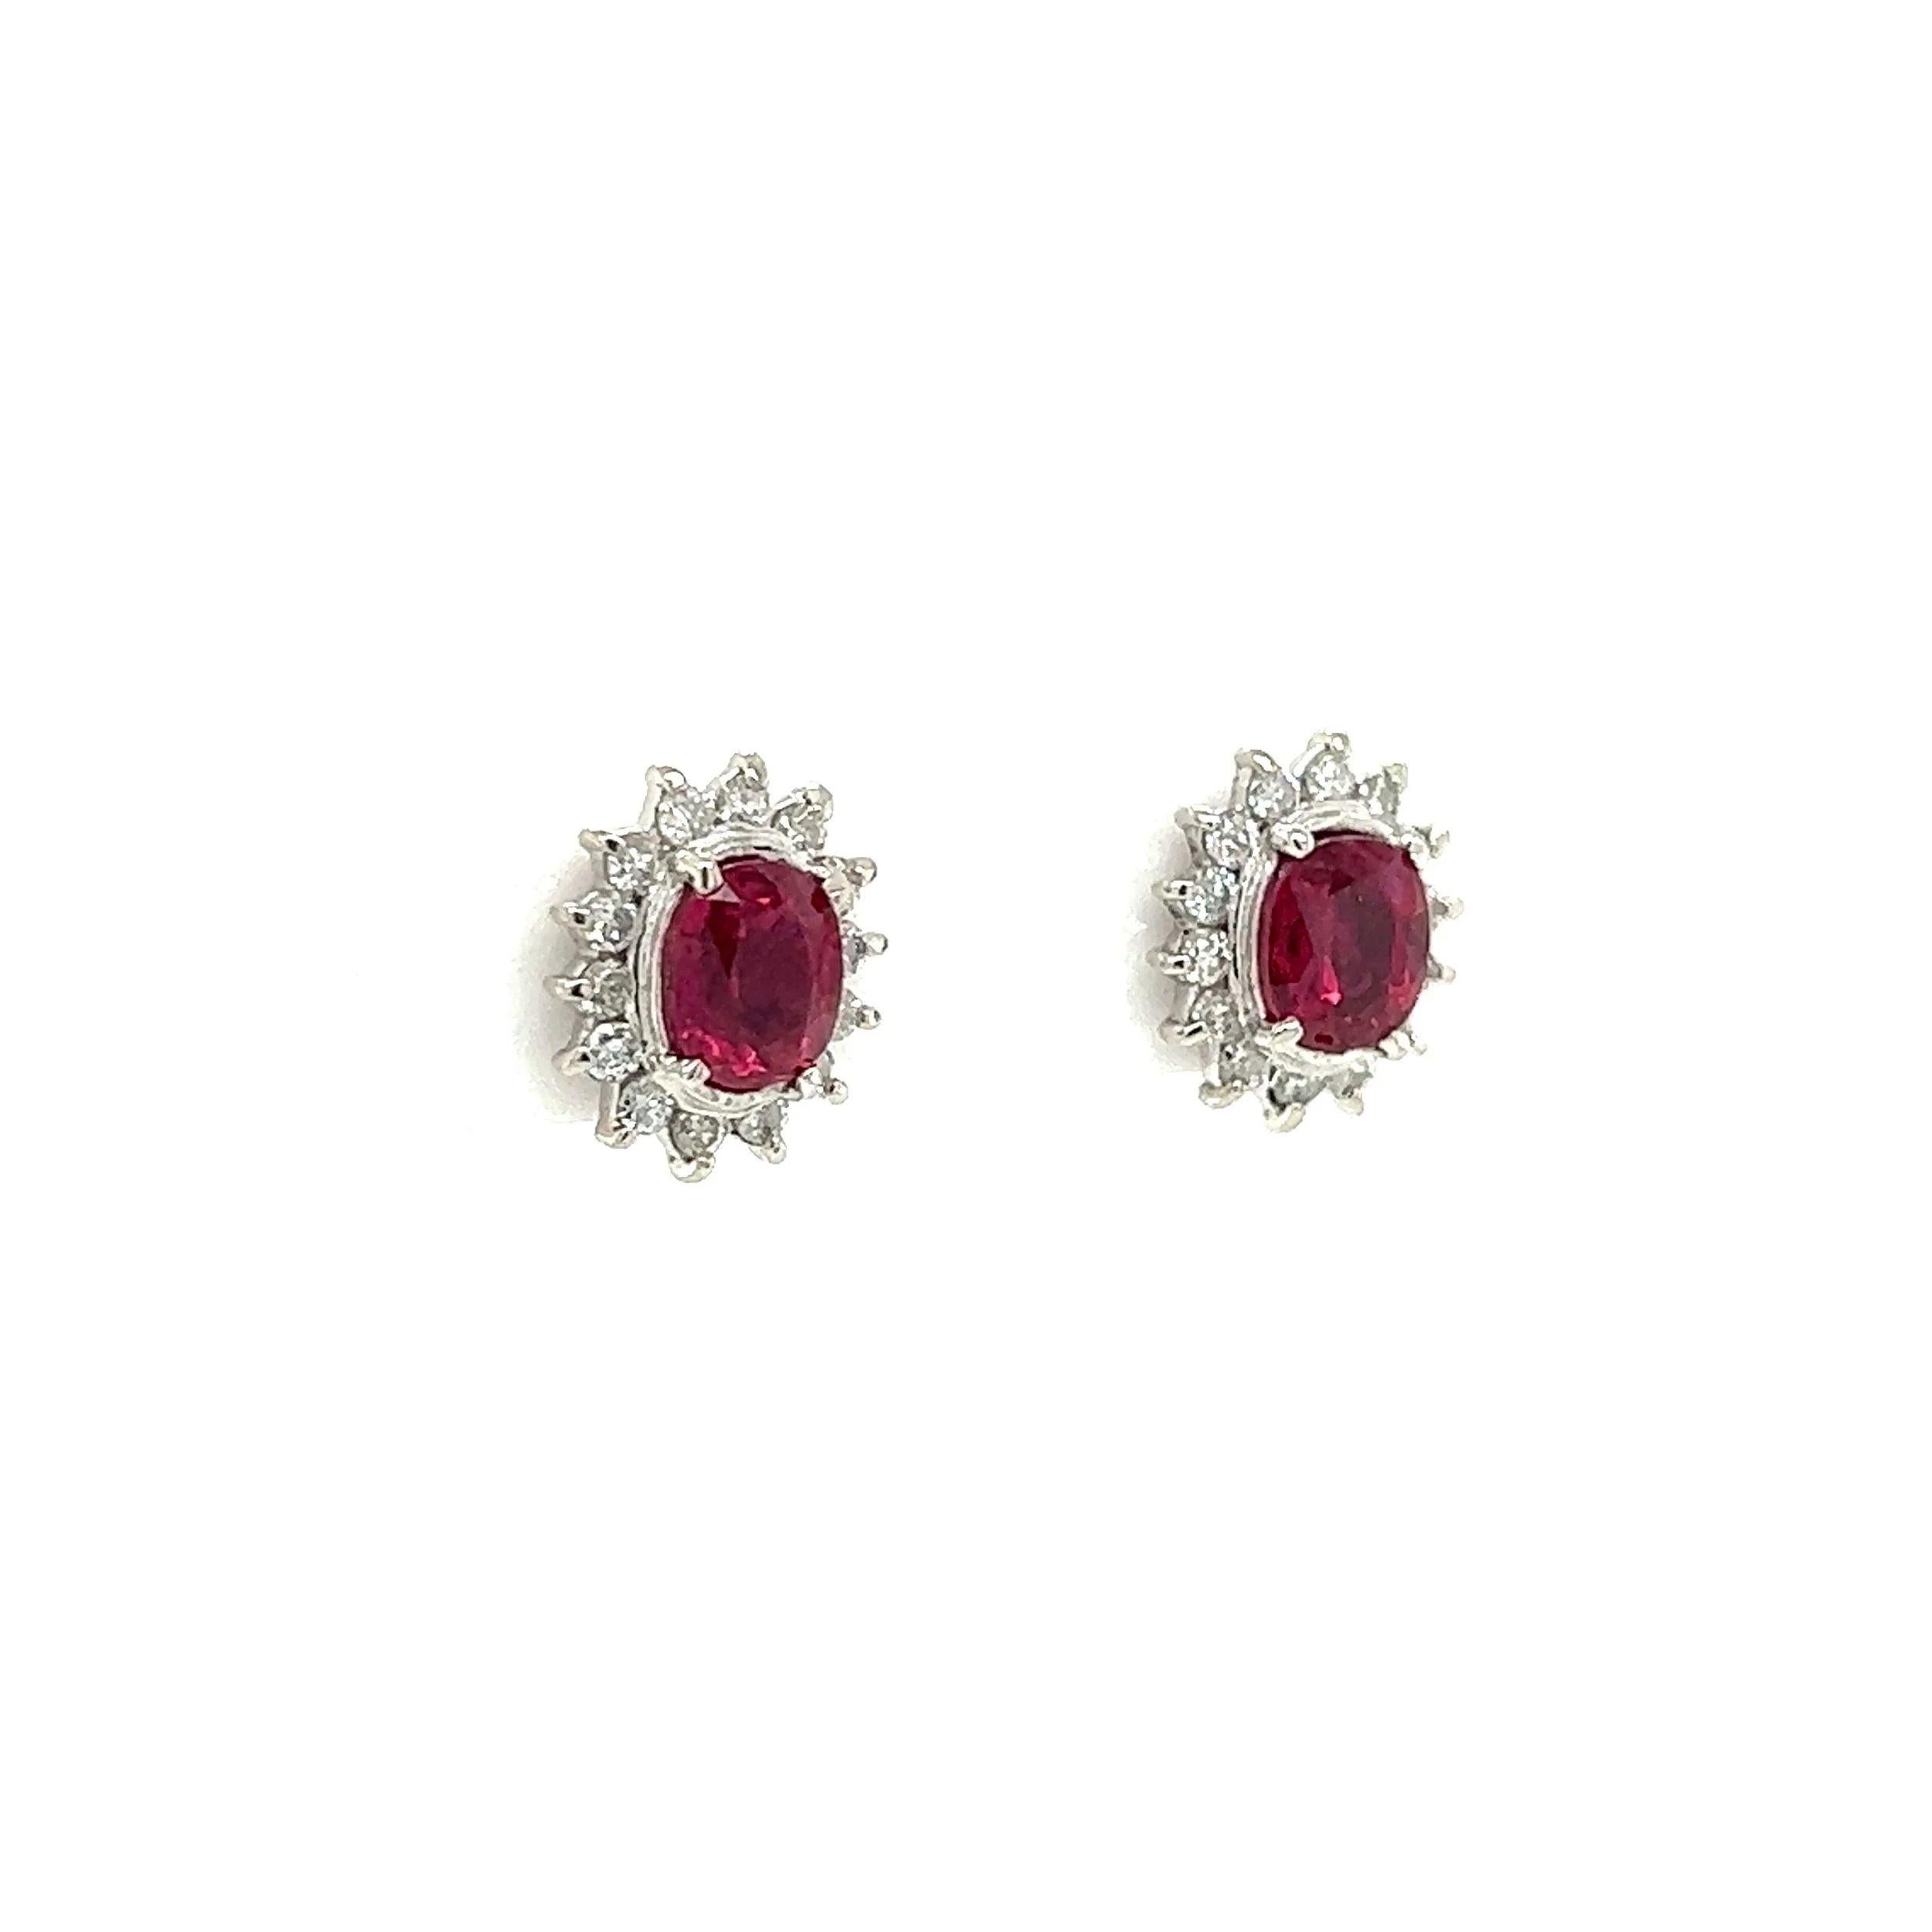 Simply Beautiful! Finely detailed Art Deco Revival 10.9mm Ruby and Diamond Platinum Stud Earrings. Each centering a securely nestled Hand set Oval Ruby, weighing 0.75ct and 0.73ct. Surrounded by Diamonds, approx. 0.40tcw. Earrings measure approx.